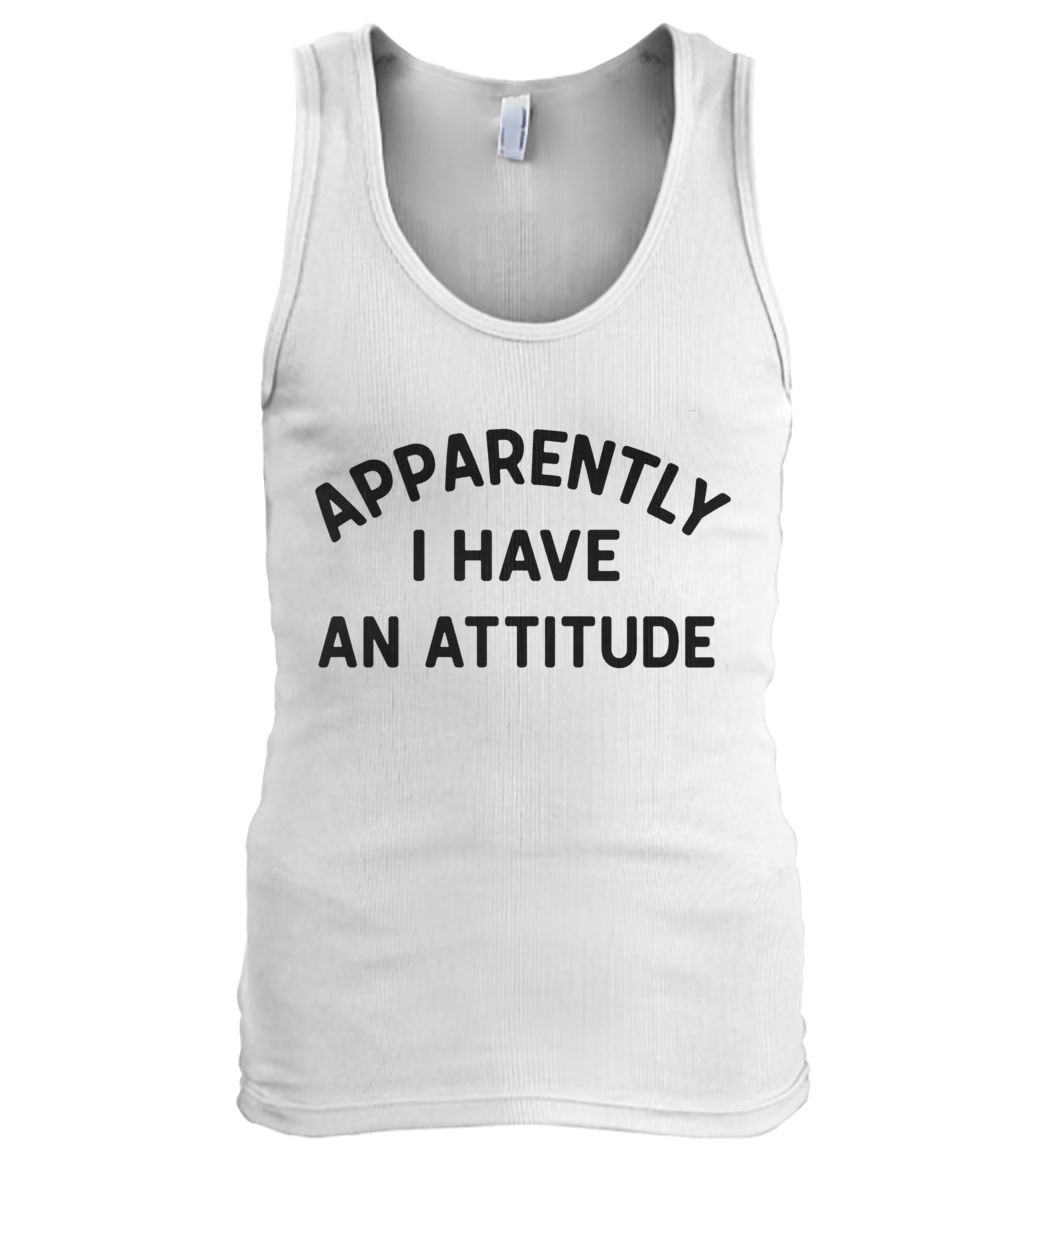 Apparently I have an attitude men's tank top